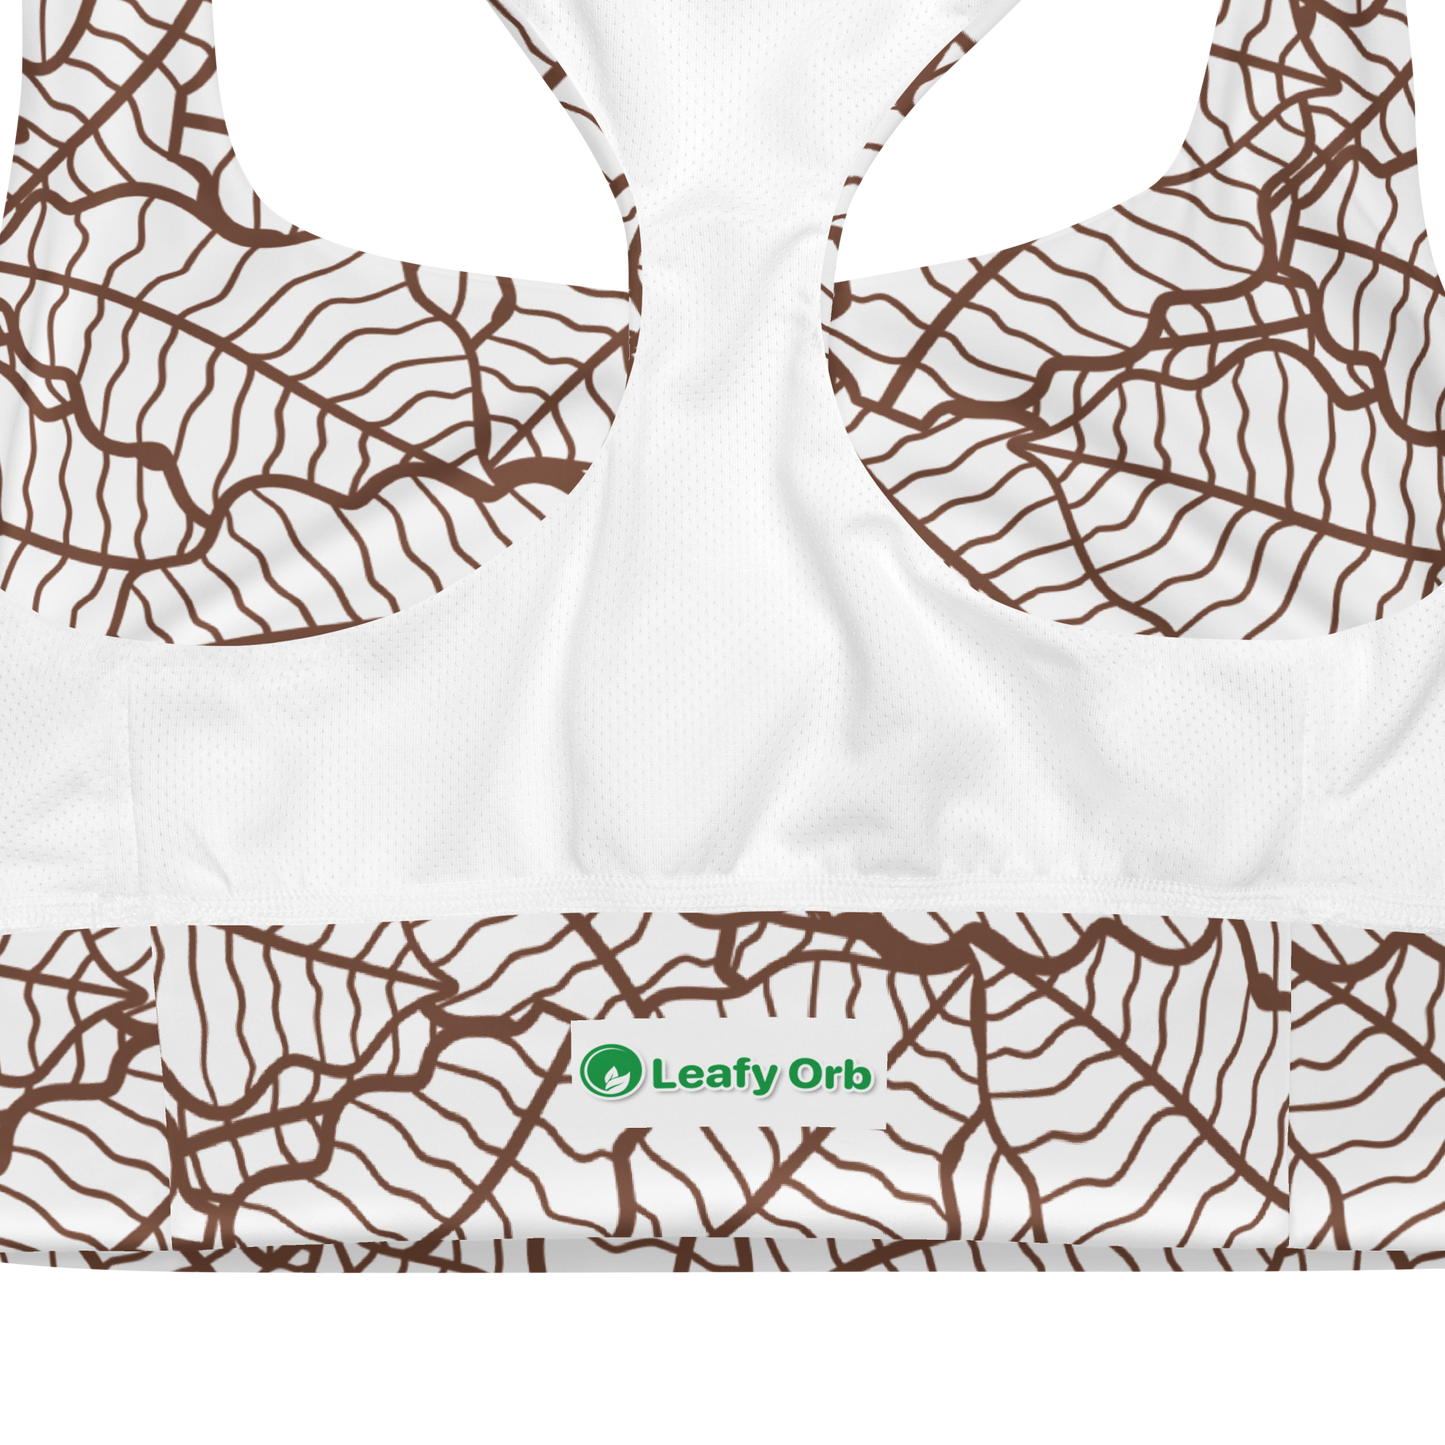 Colorful Fall Leaves | Seamless Patterns | All-Over Print Longline Sports Bra - #5